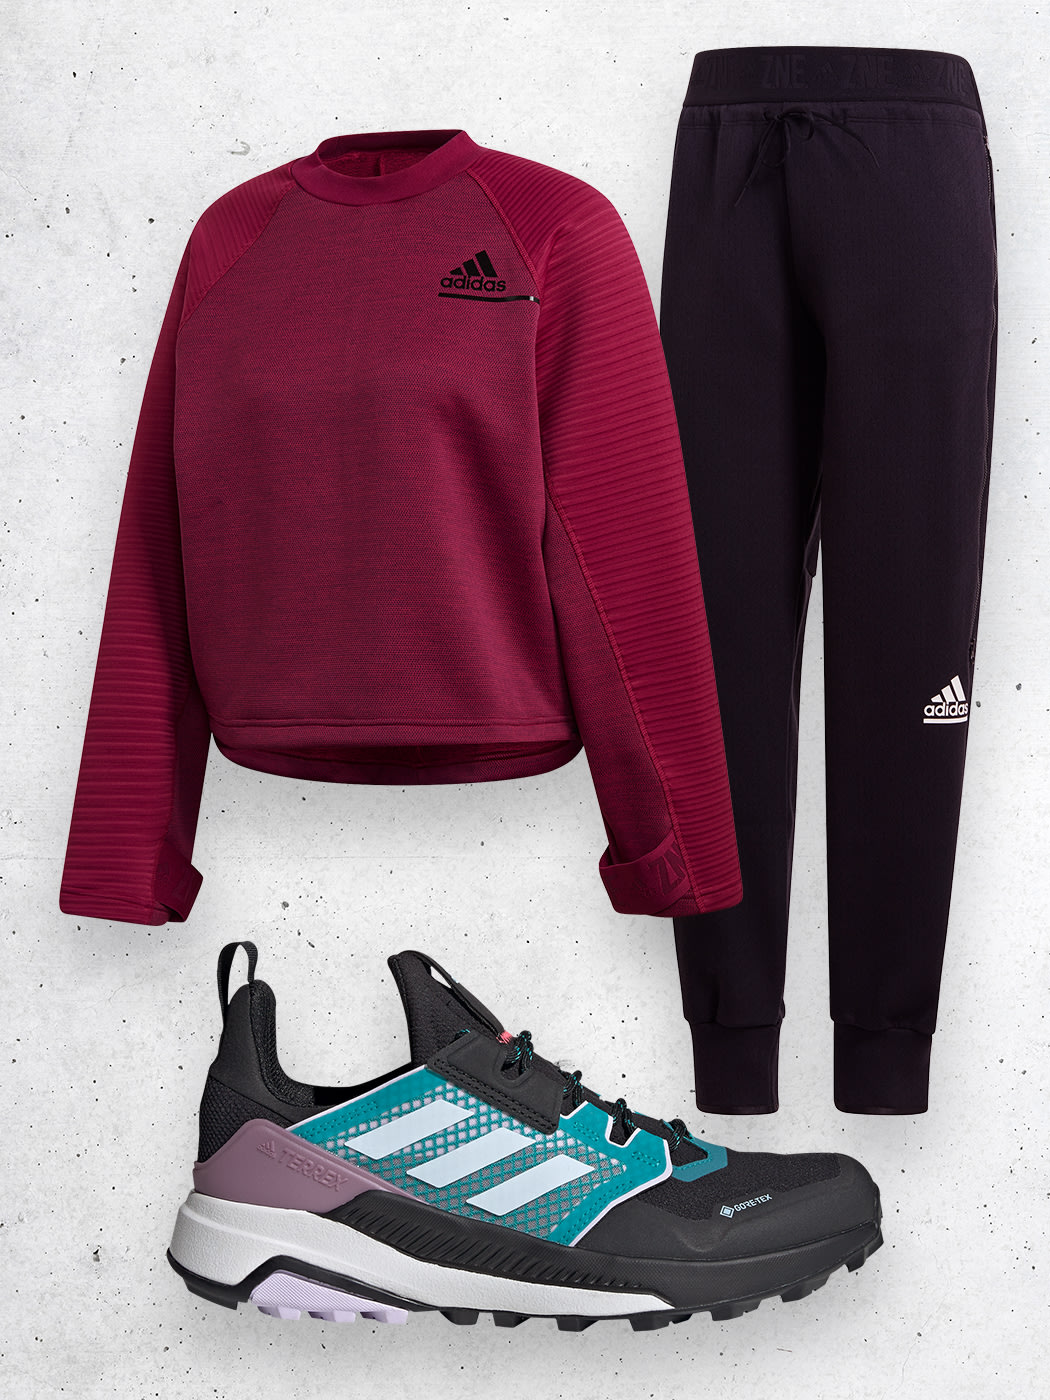 adidas online shop luxembourg